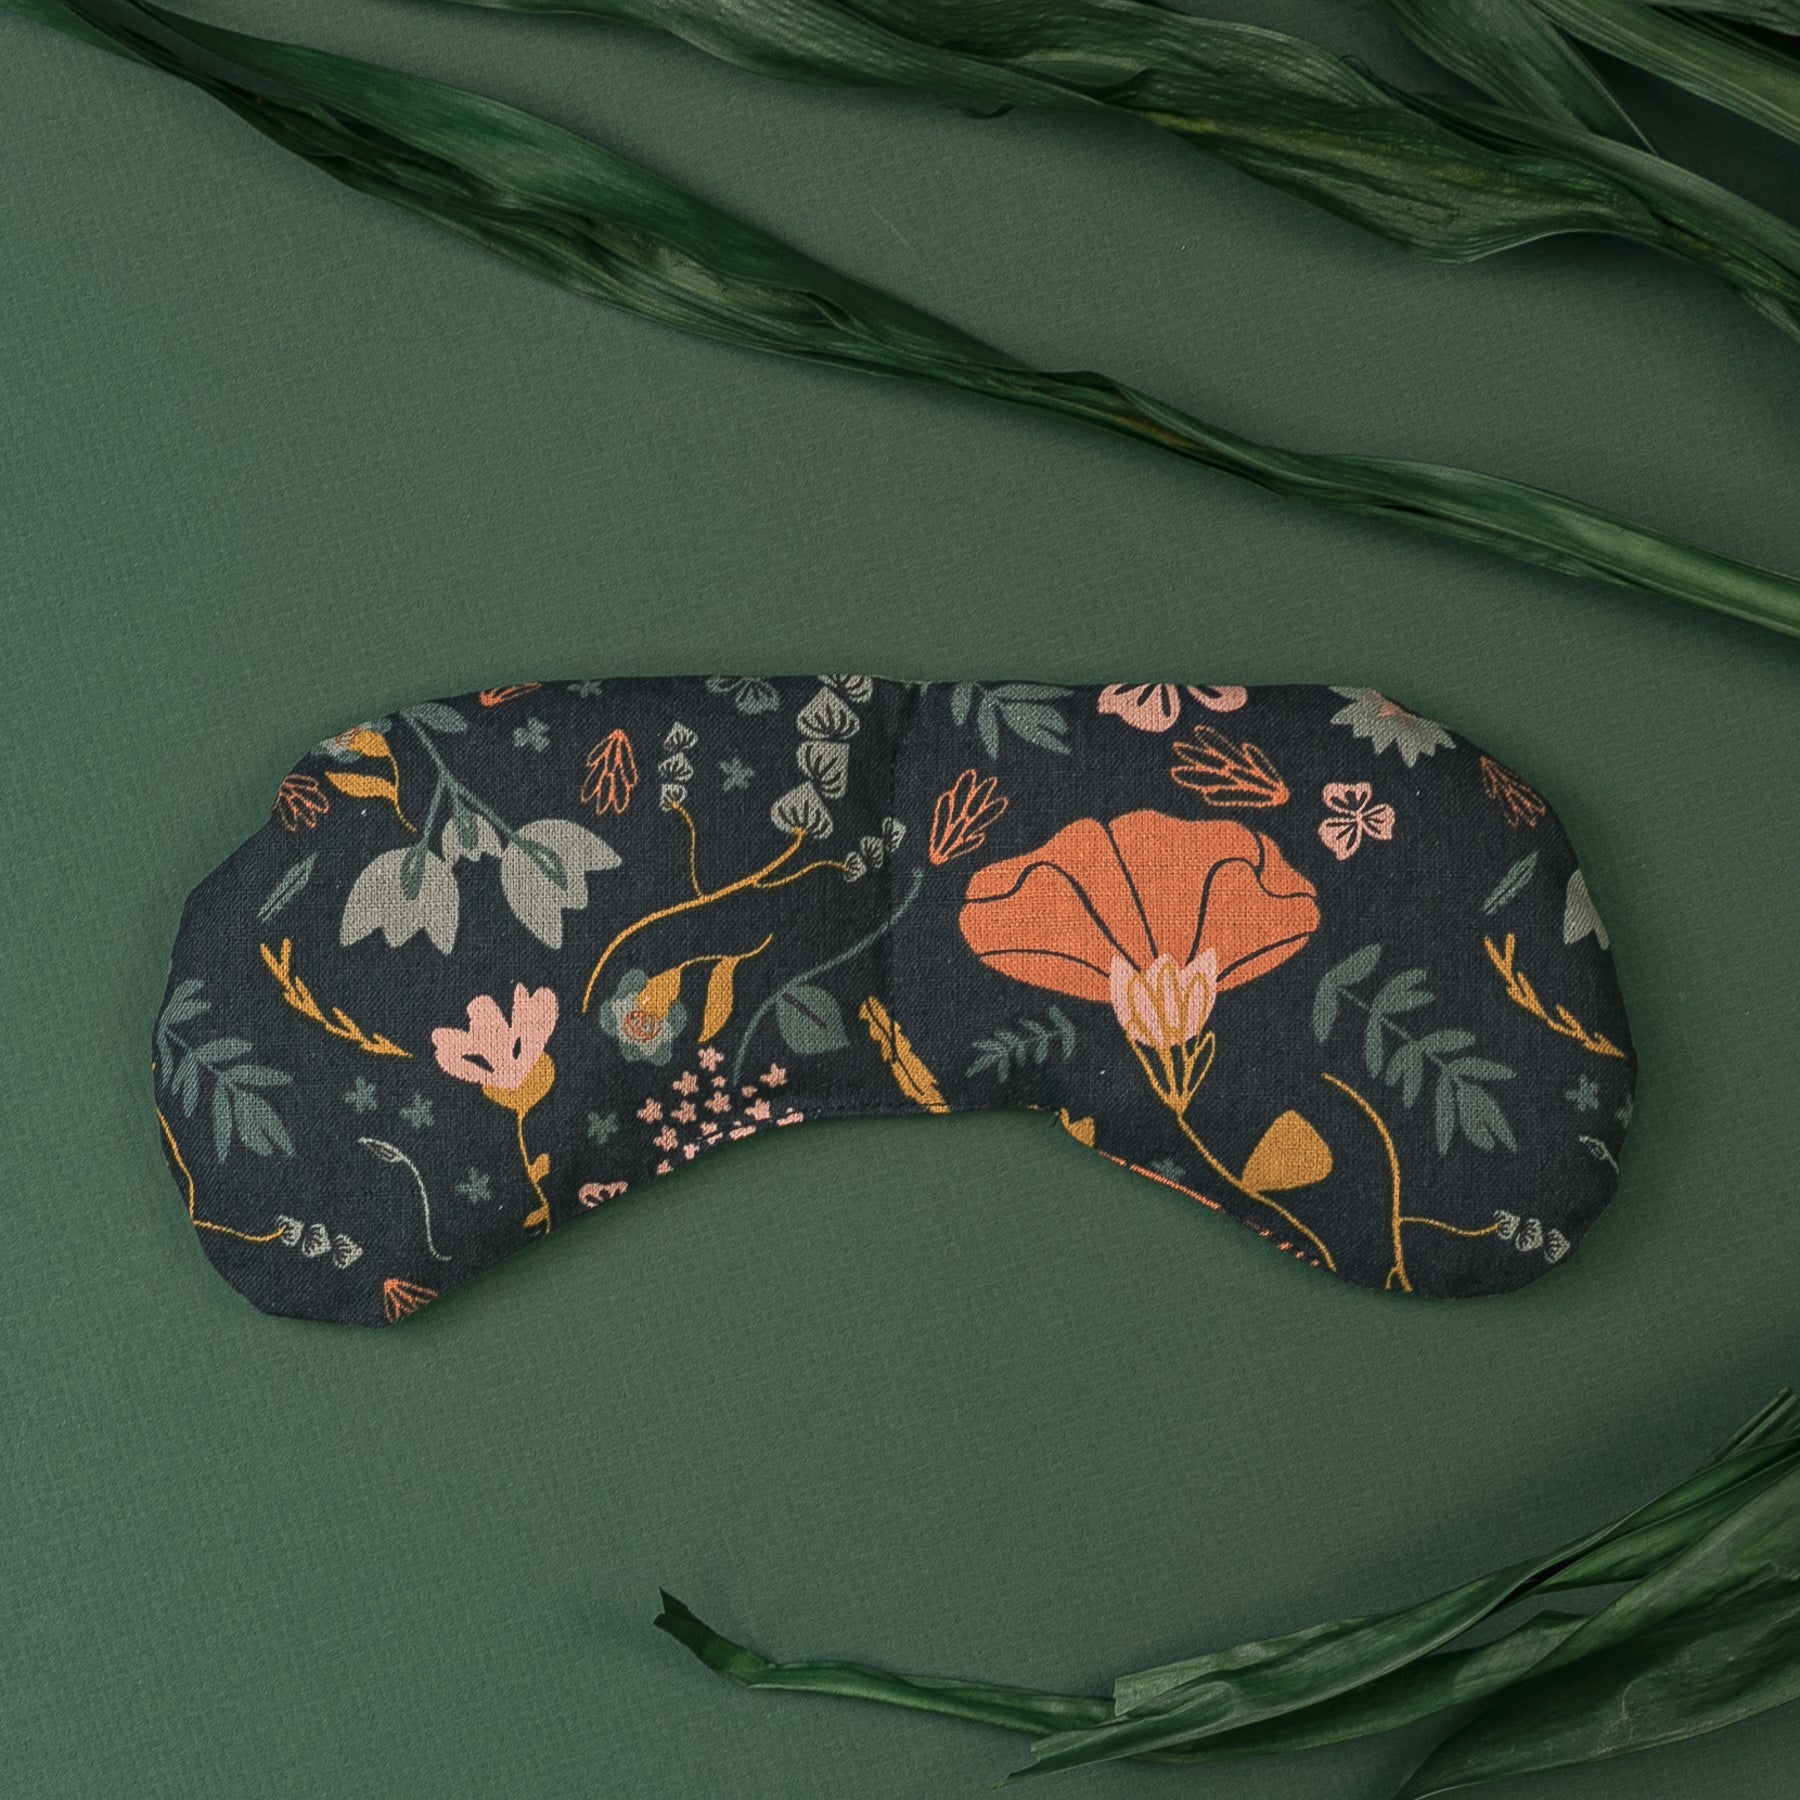 Migraine Mask by Slow North. Strap free cotton weighted eye pillow to be used hot or cold to sooth headaches and tired eyes. Navy with multicolor floral design. Dark green leaves on dark green background.